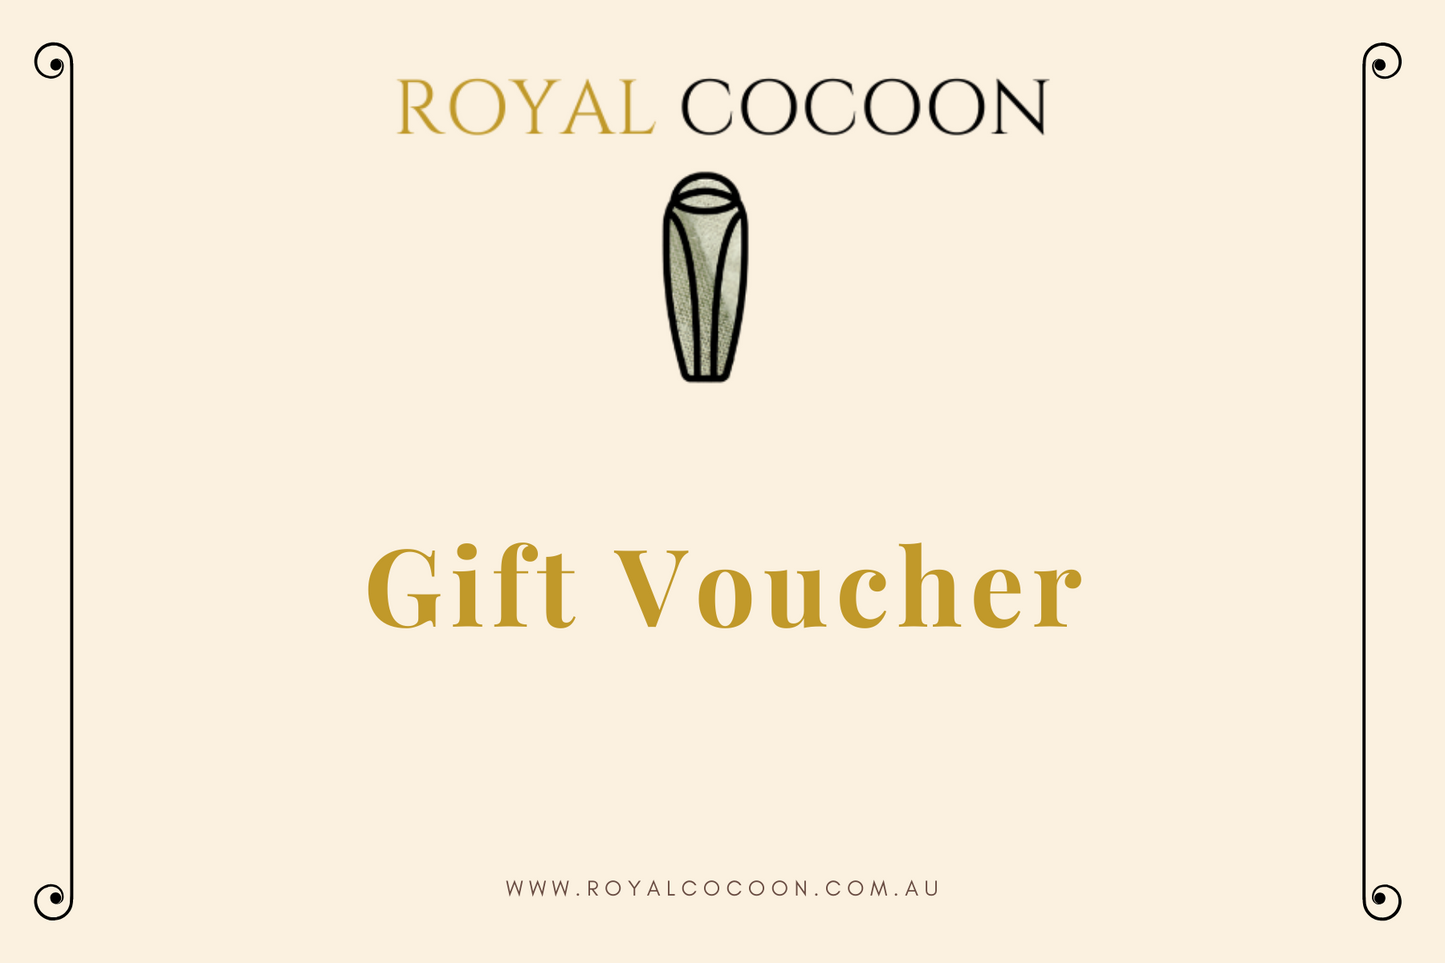 Royal Cocoon Gift Voucher